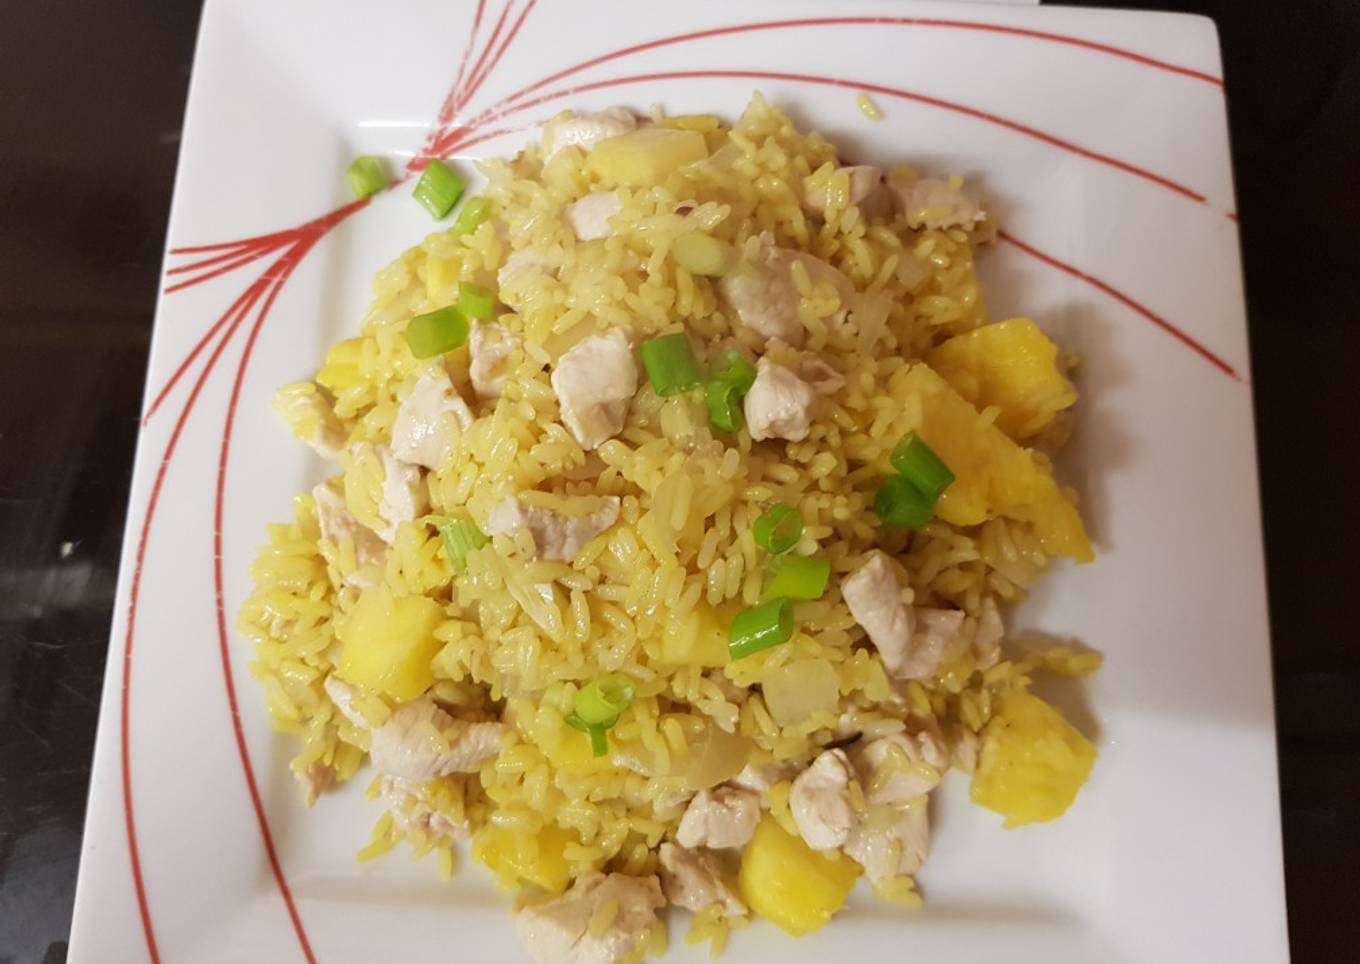 My Chicken with Pineapple fried Rice. 😘